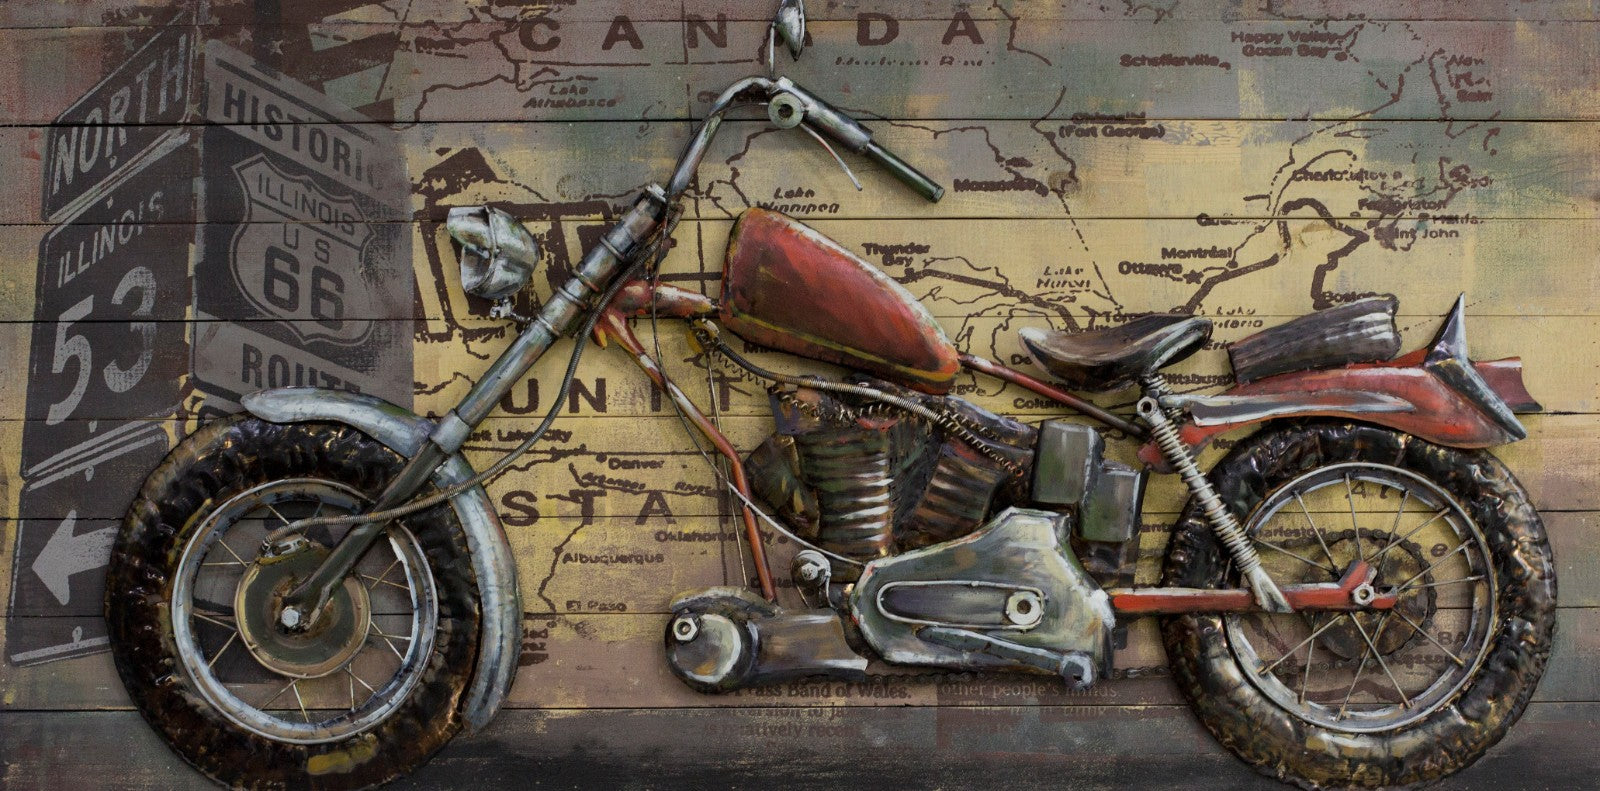 "Motorcycle 1" Primo Mixed Media Hand Painted Iron Wall Sculpture Handcrafted Artwork